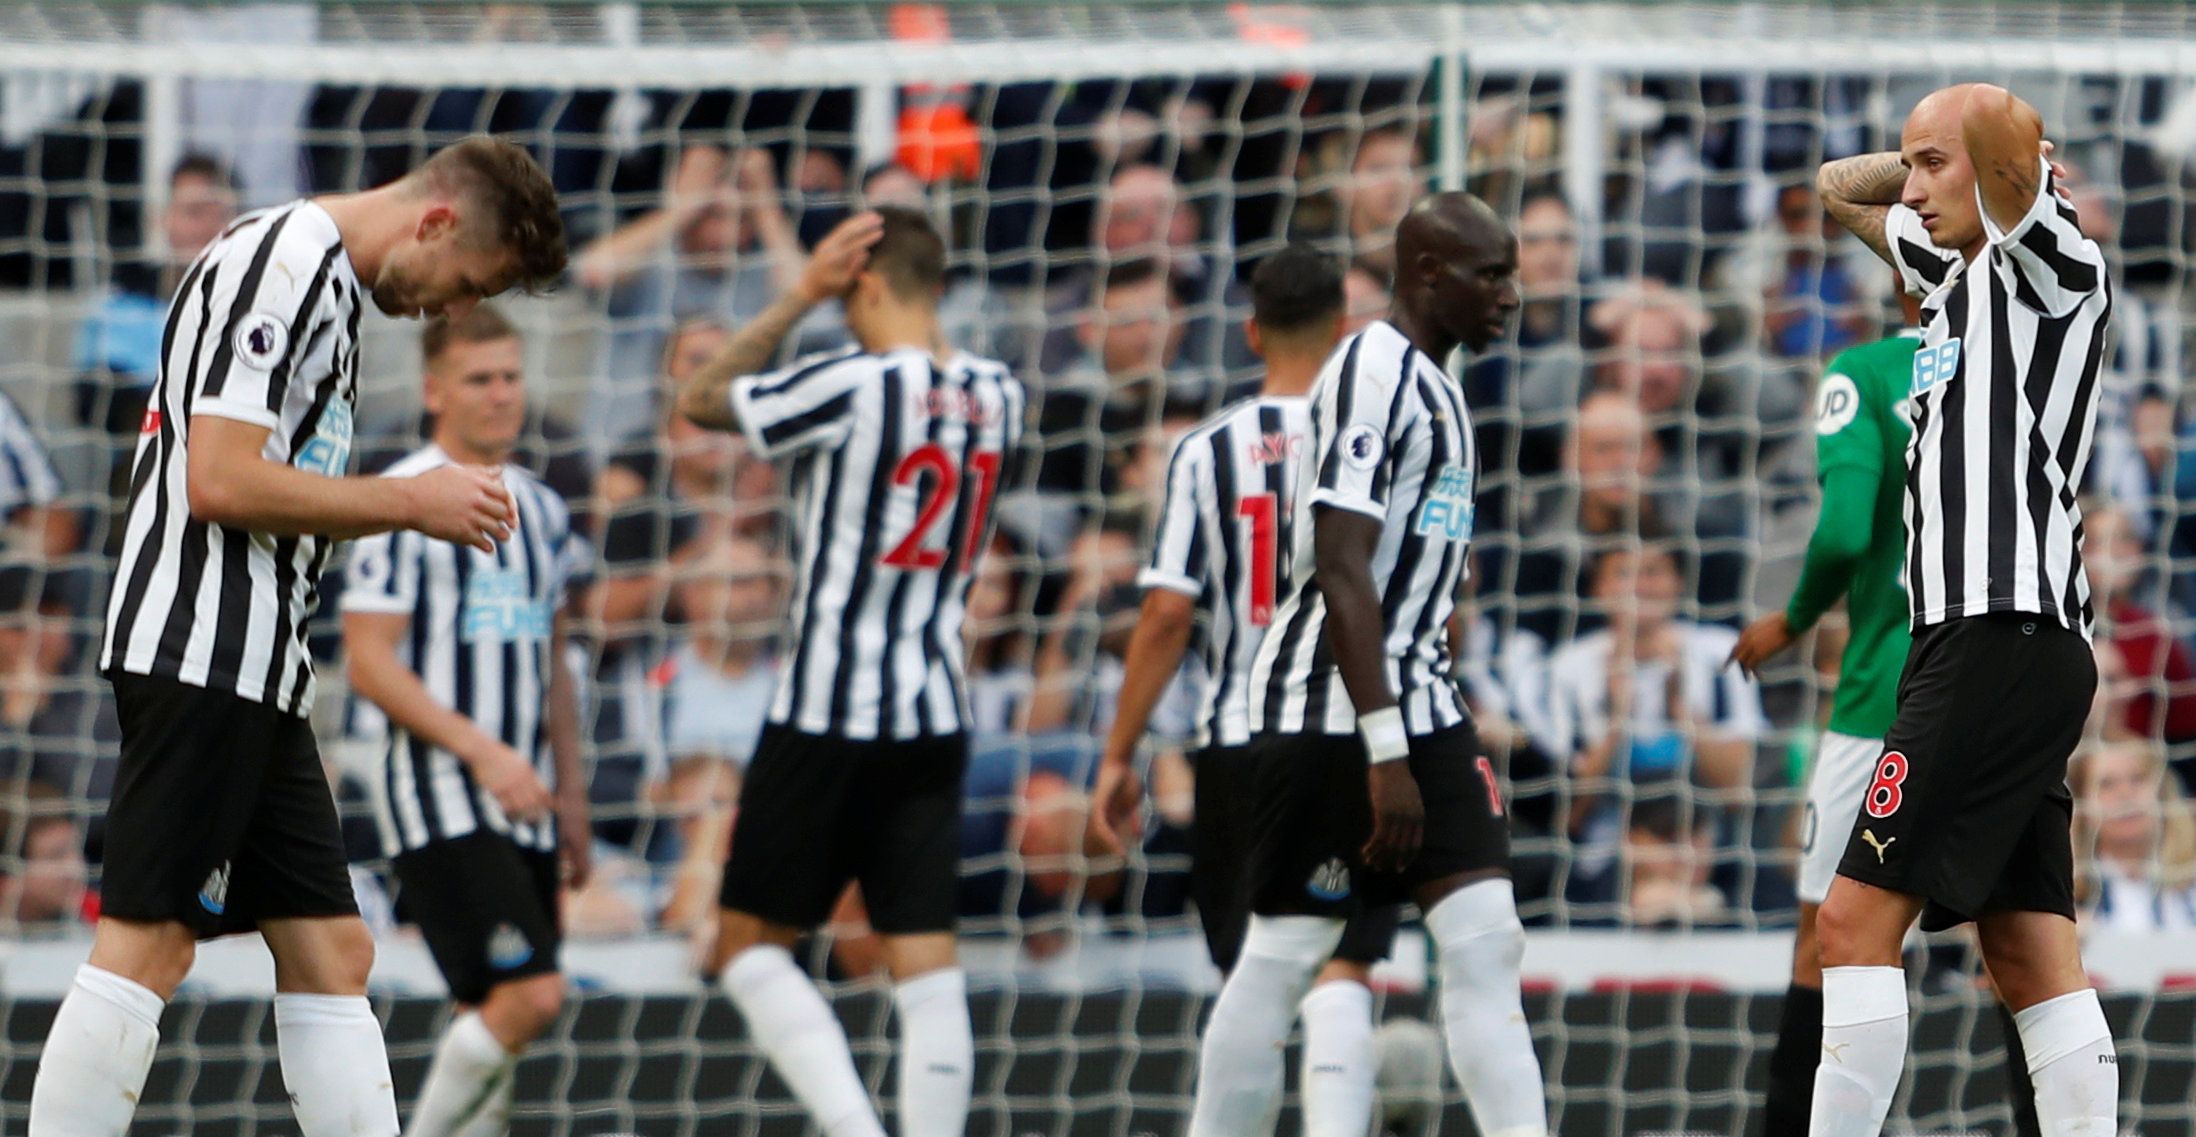 Soccer Football - Premier League - Newcastle United v Brighton &amp; Hove Albion - St James' Park, Newcastle, Britain - October 20, 2018  Newcastle United's Jonjo Shelvey and team mates react during the match             Action Images via Reuters/Lee Smith  EDITORIAL USE ONLY. No use with unauthorized audio, video, data, fixture lists, club/league logos or "live" services. Online in-match use limited to 75 images, no video emulation. No use in betting, games or single club/league/player publicat